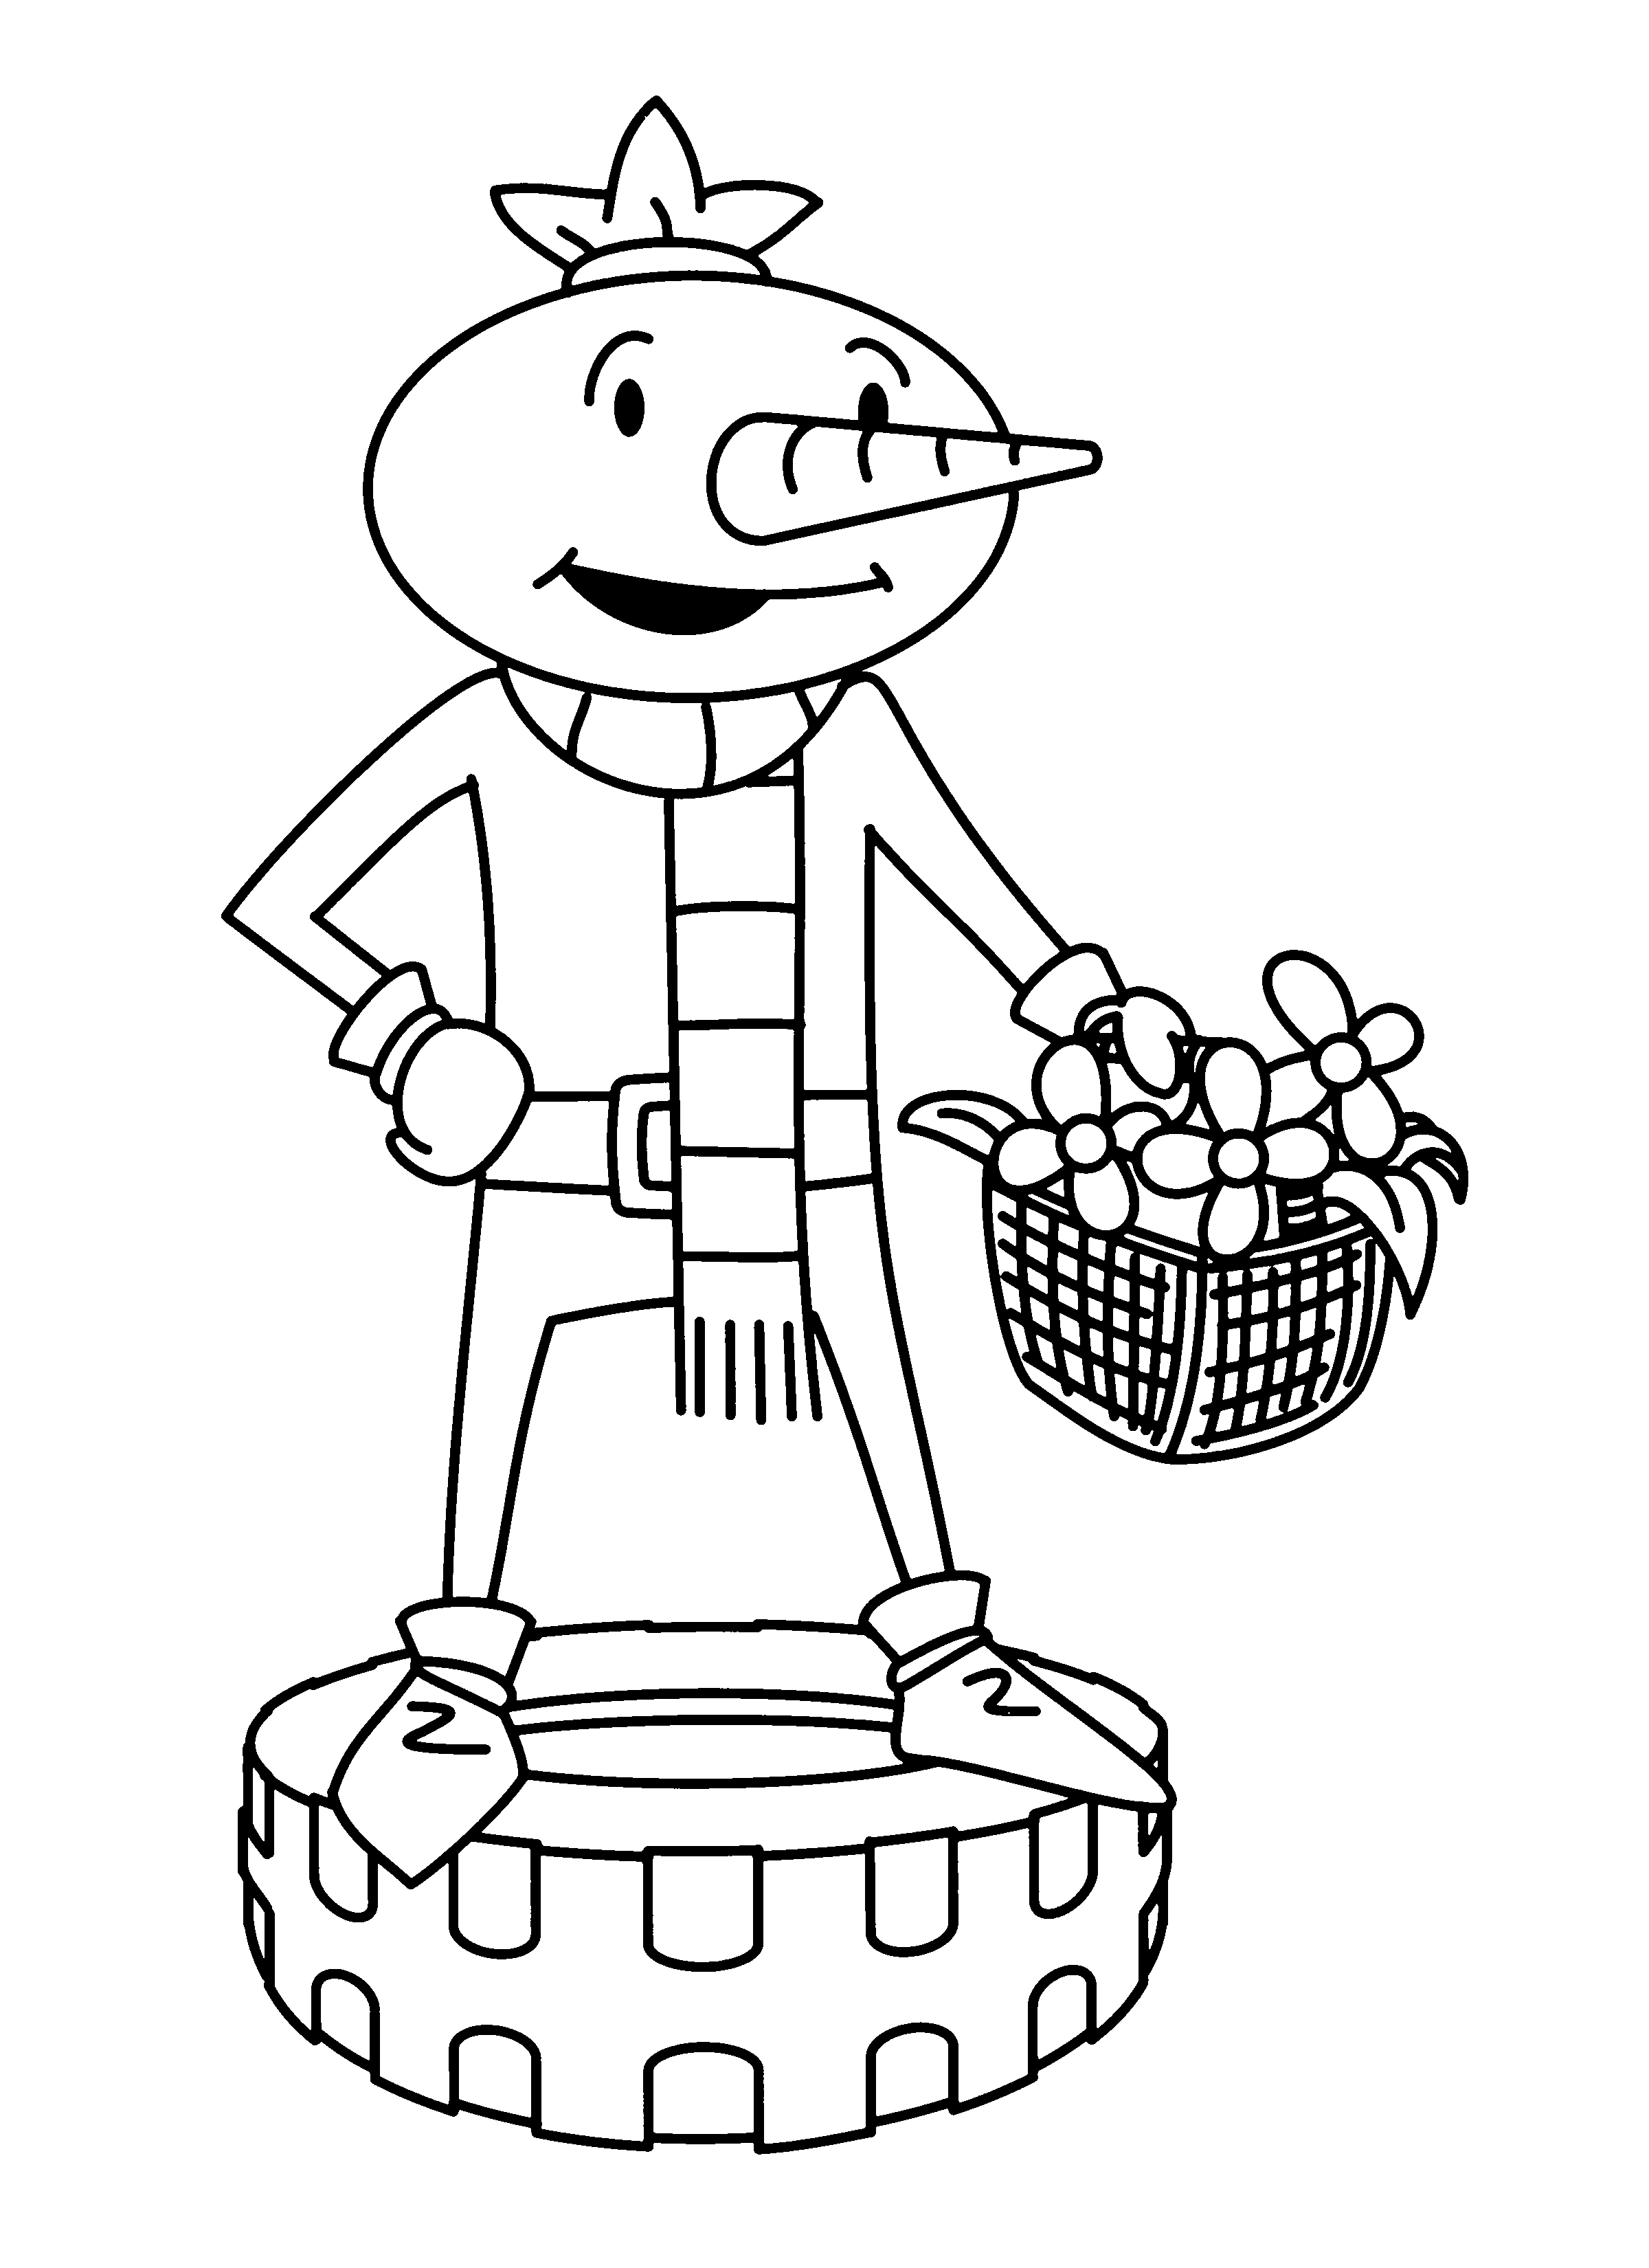 Bob the builder coloring pages to download and print for free